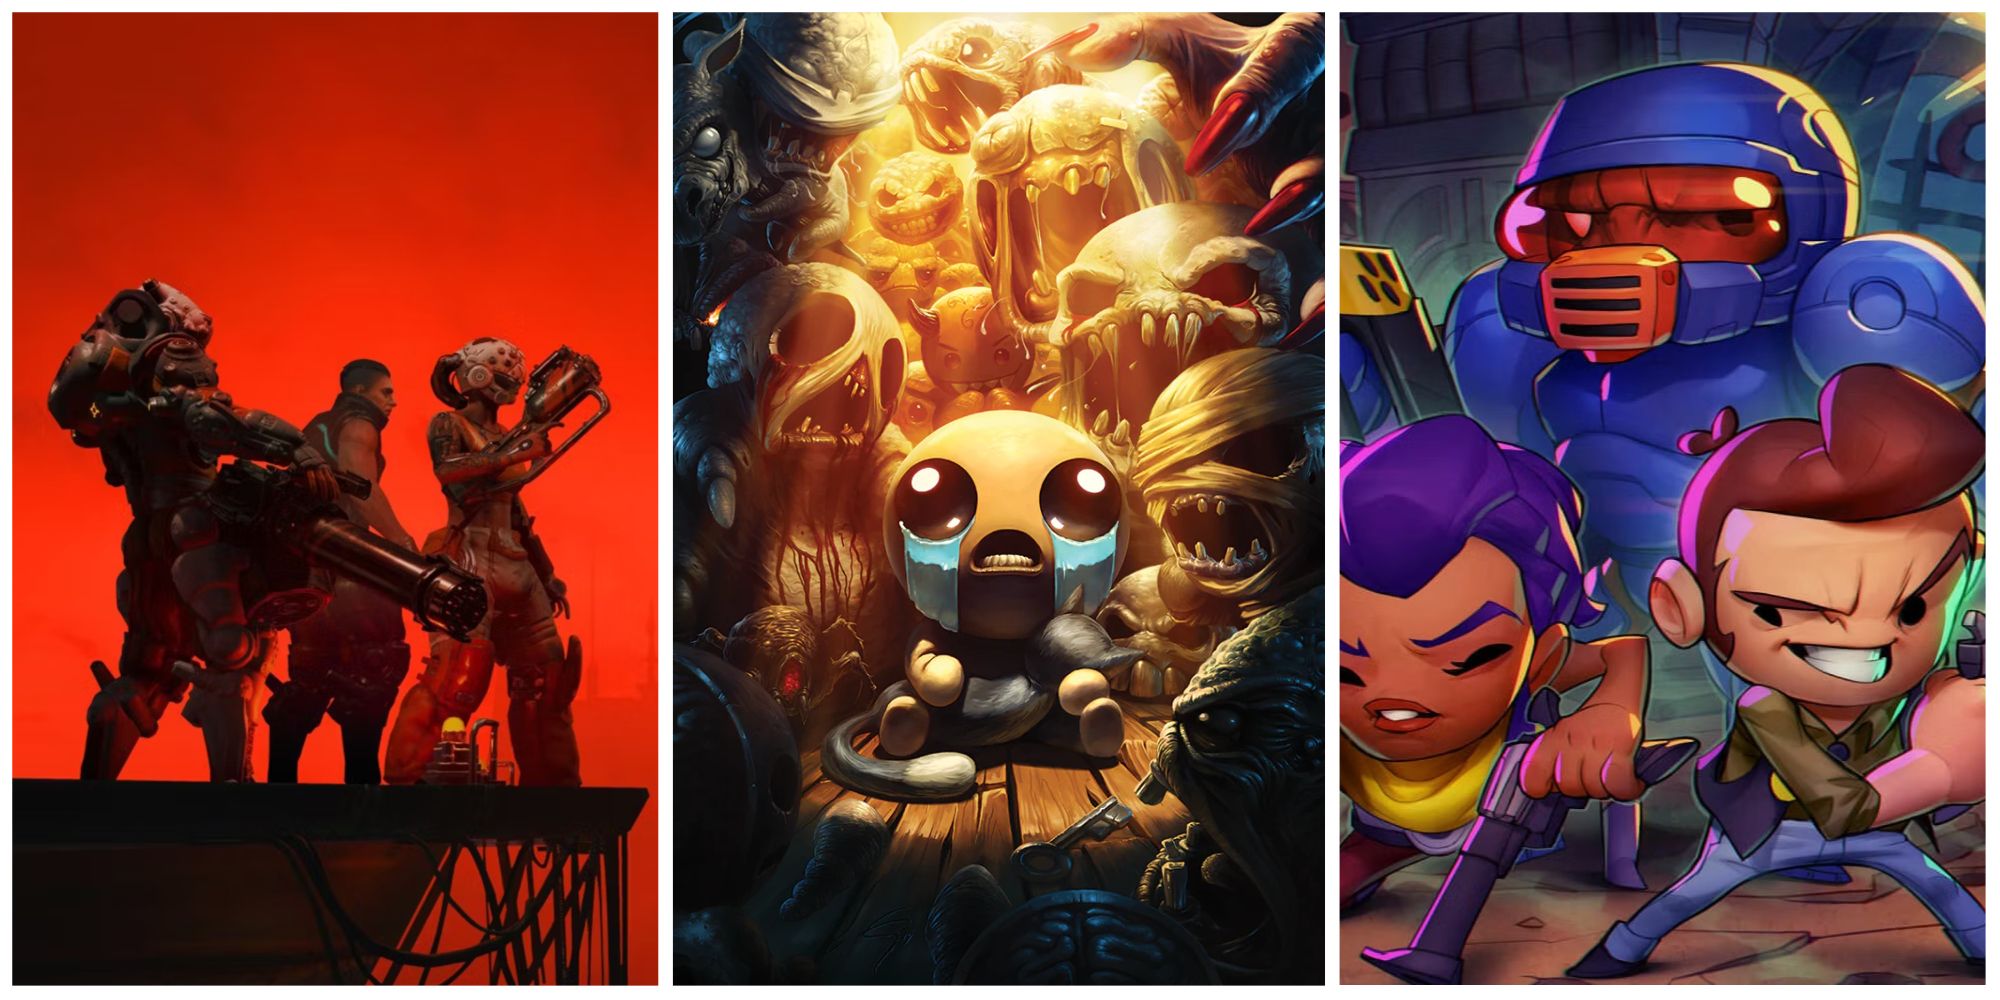 Split image featuring characters from The Ascent, The Binding of Isaac, and Enter The Gungeon